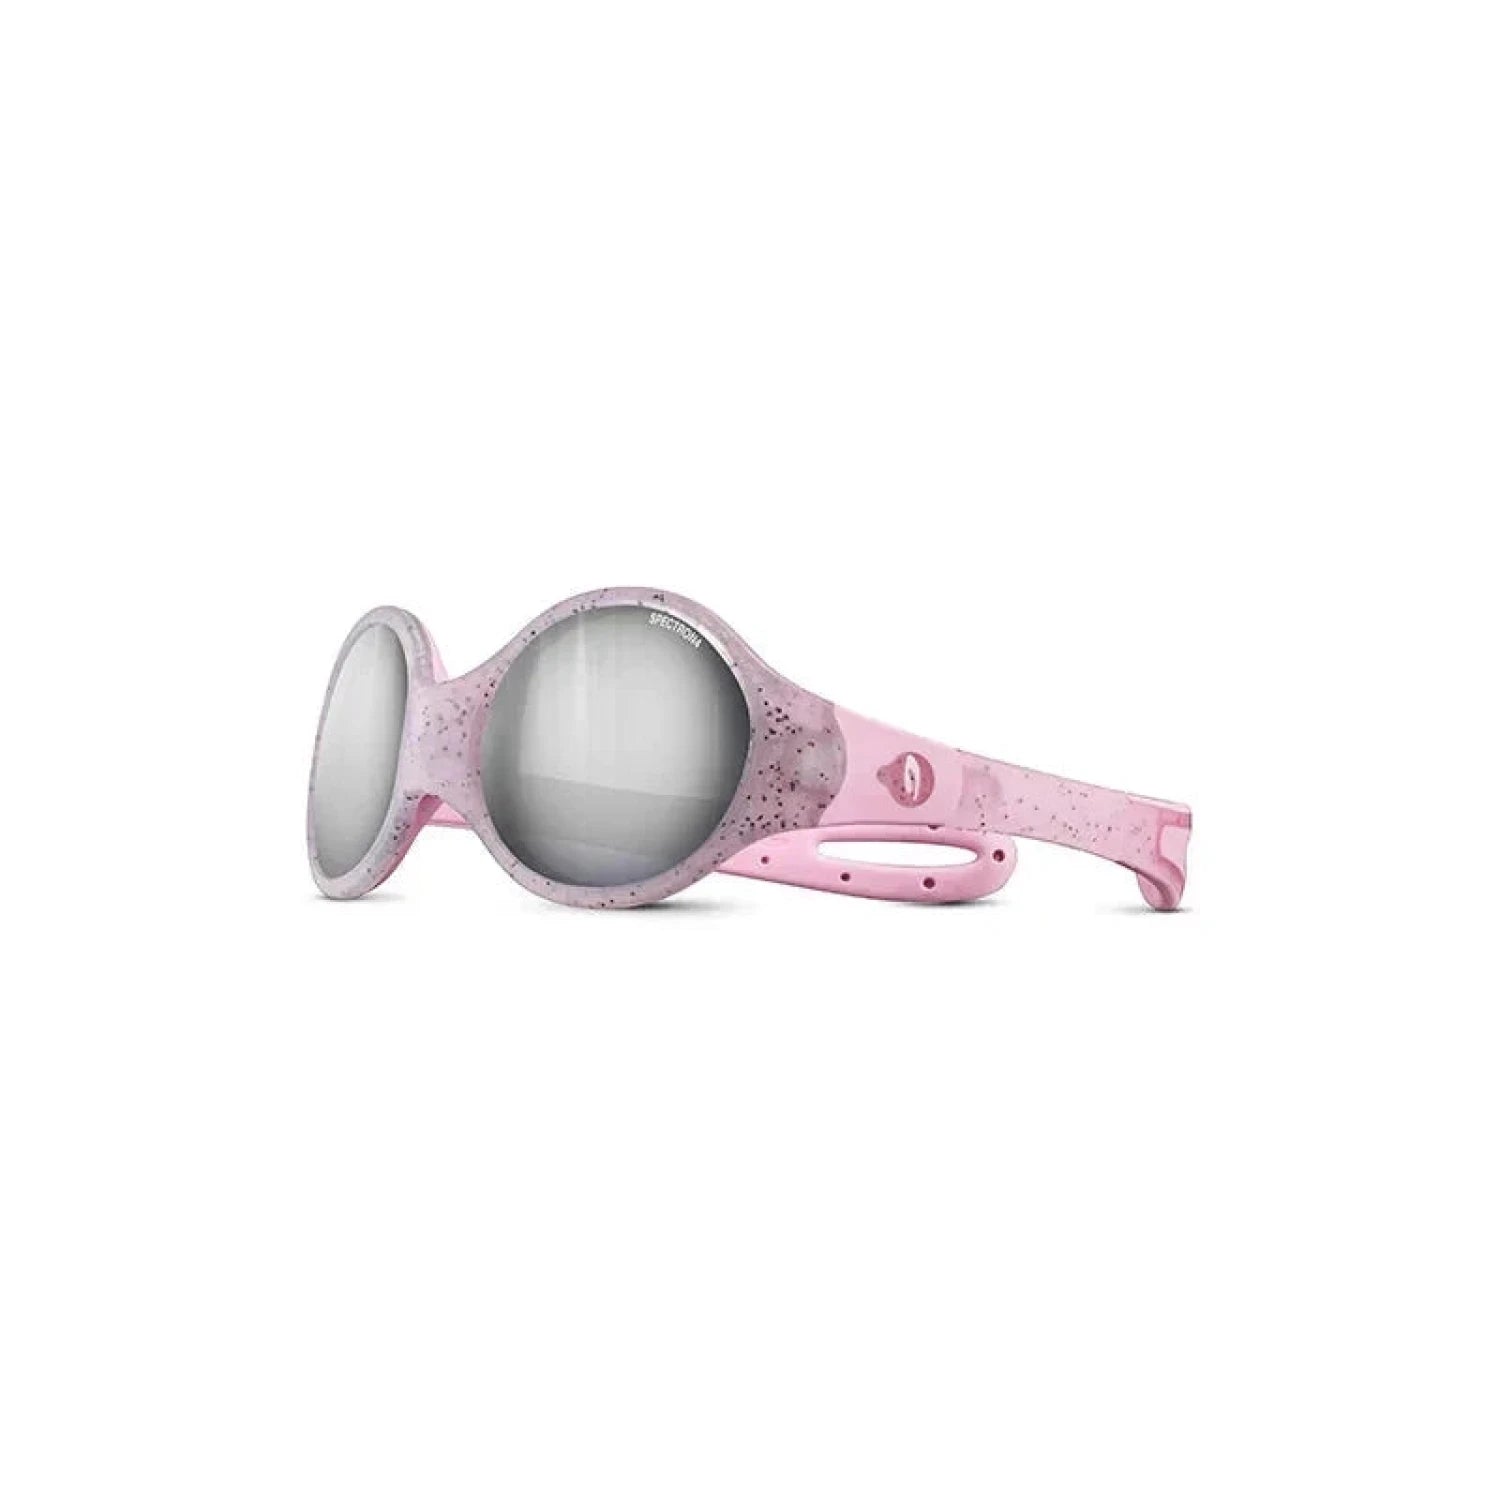 Julbo Kids Loop M shown in the Pink Glitter color option.